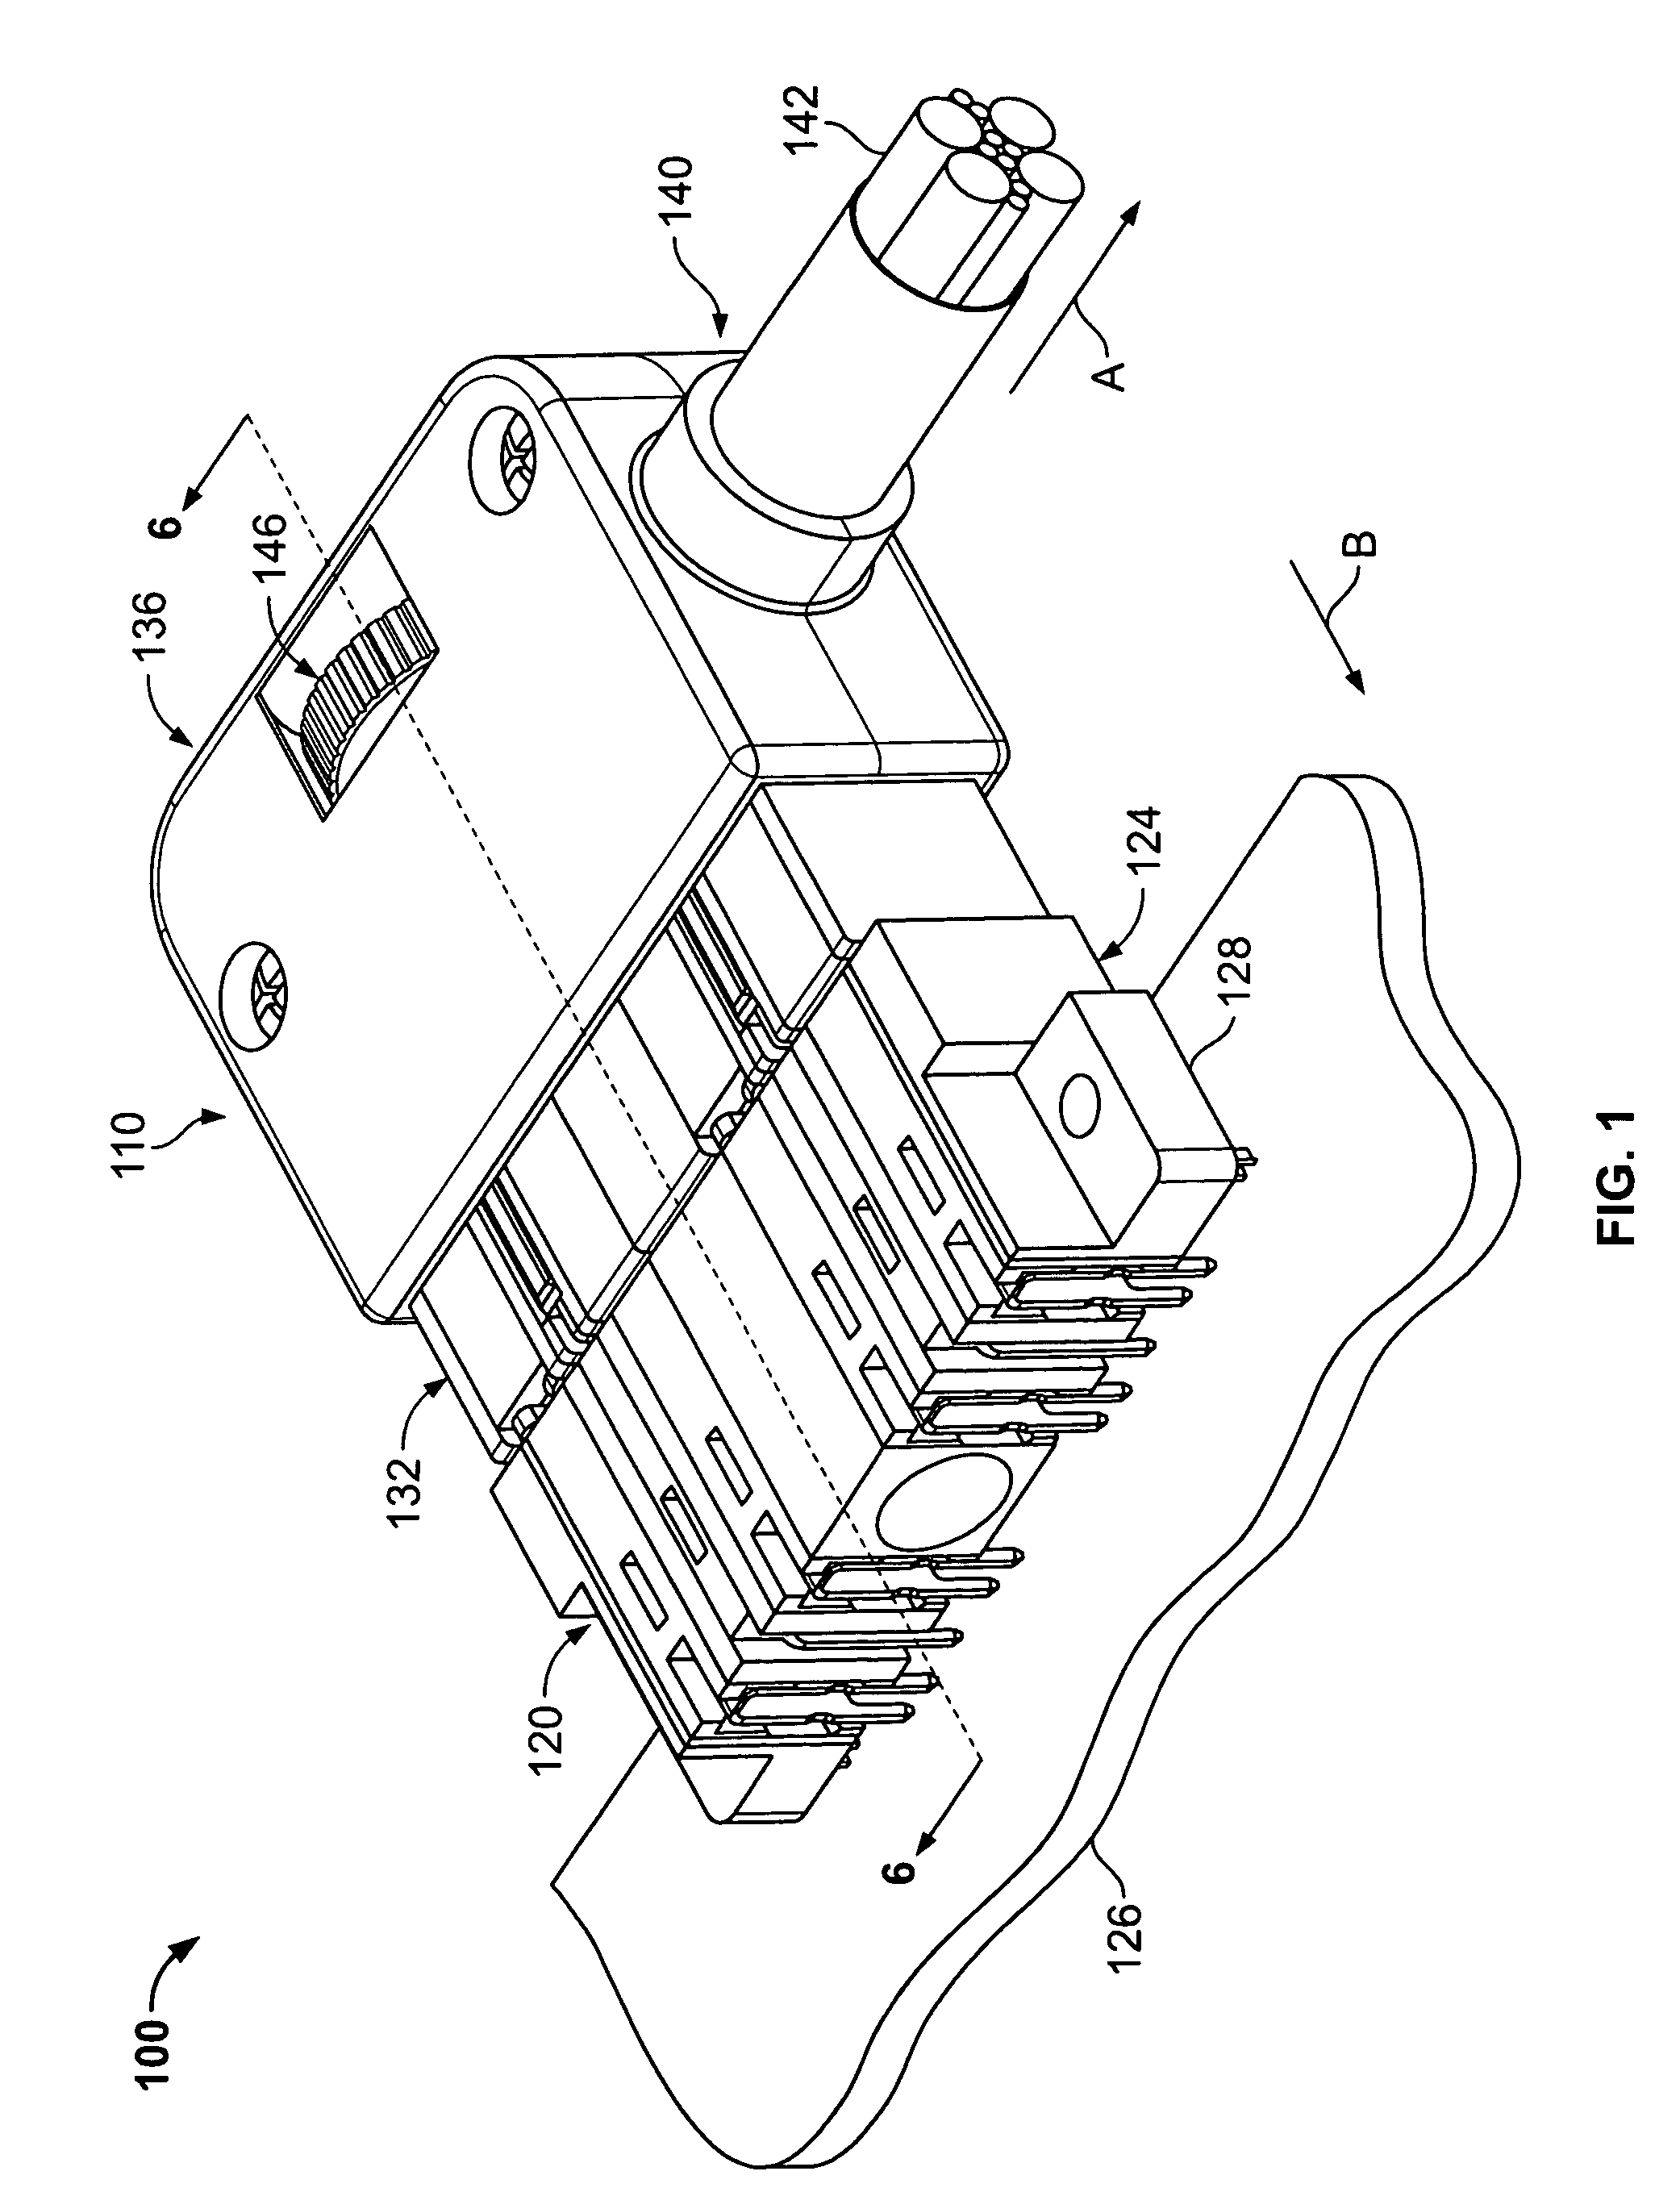 Connector with thumb screw retention member